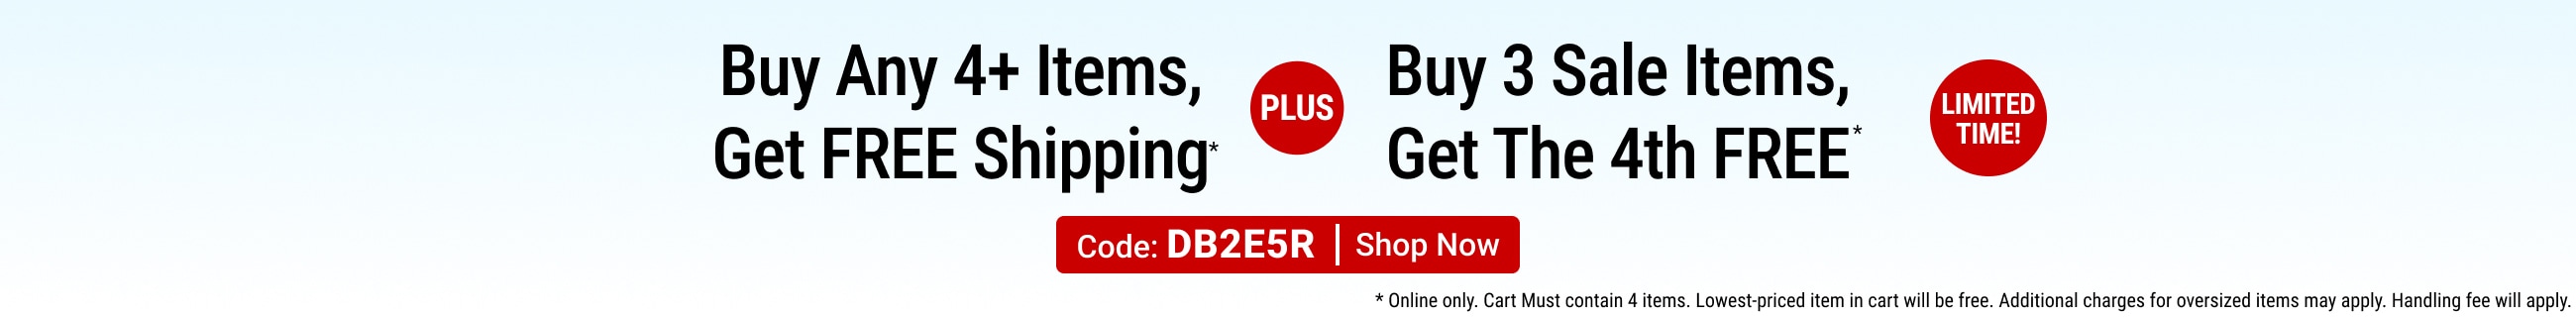 Buy any 4+ items, get free shipping - shop now